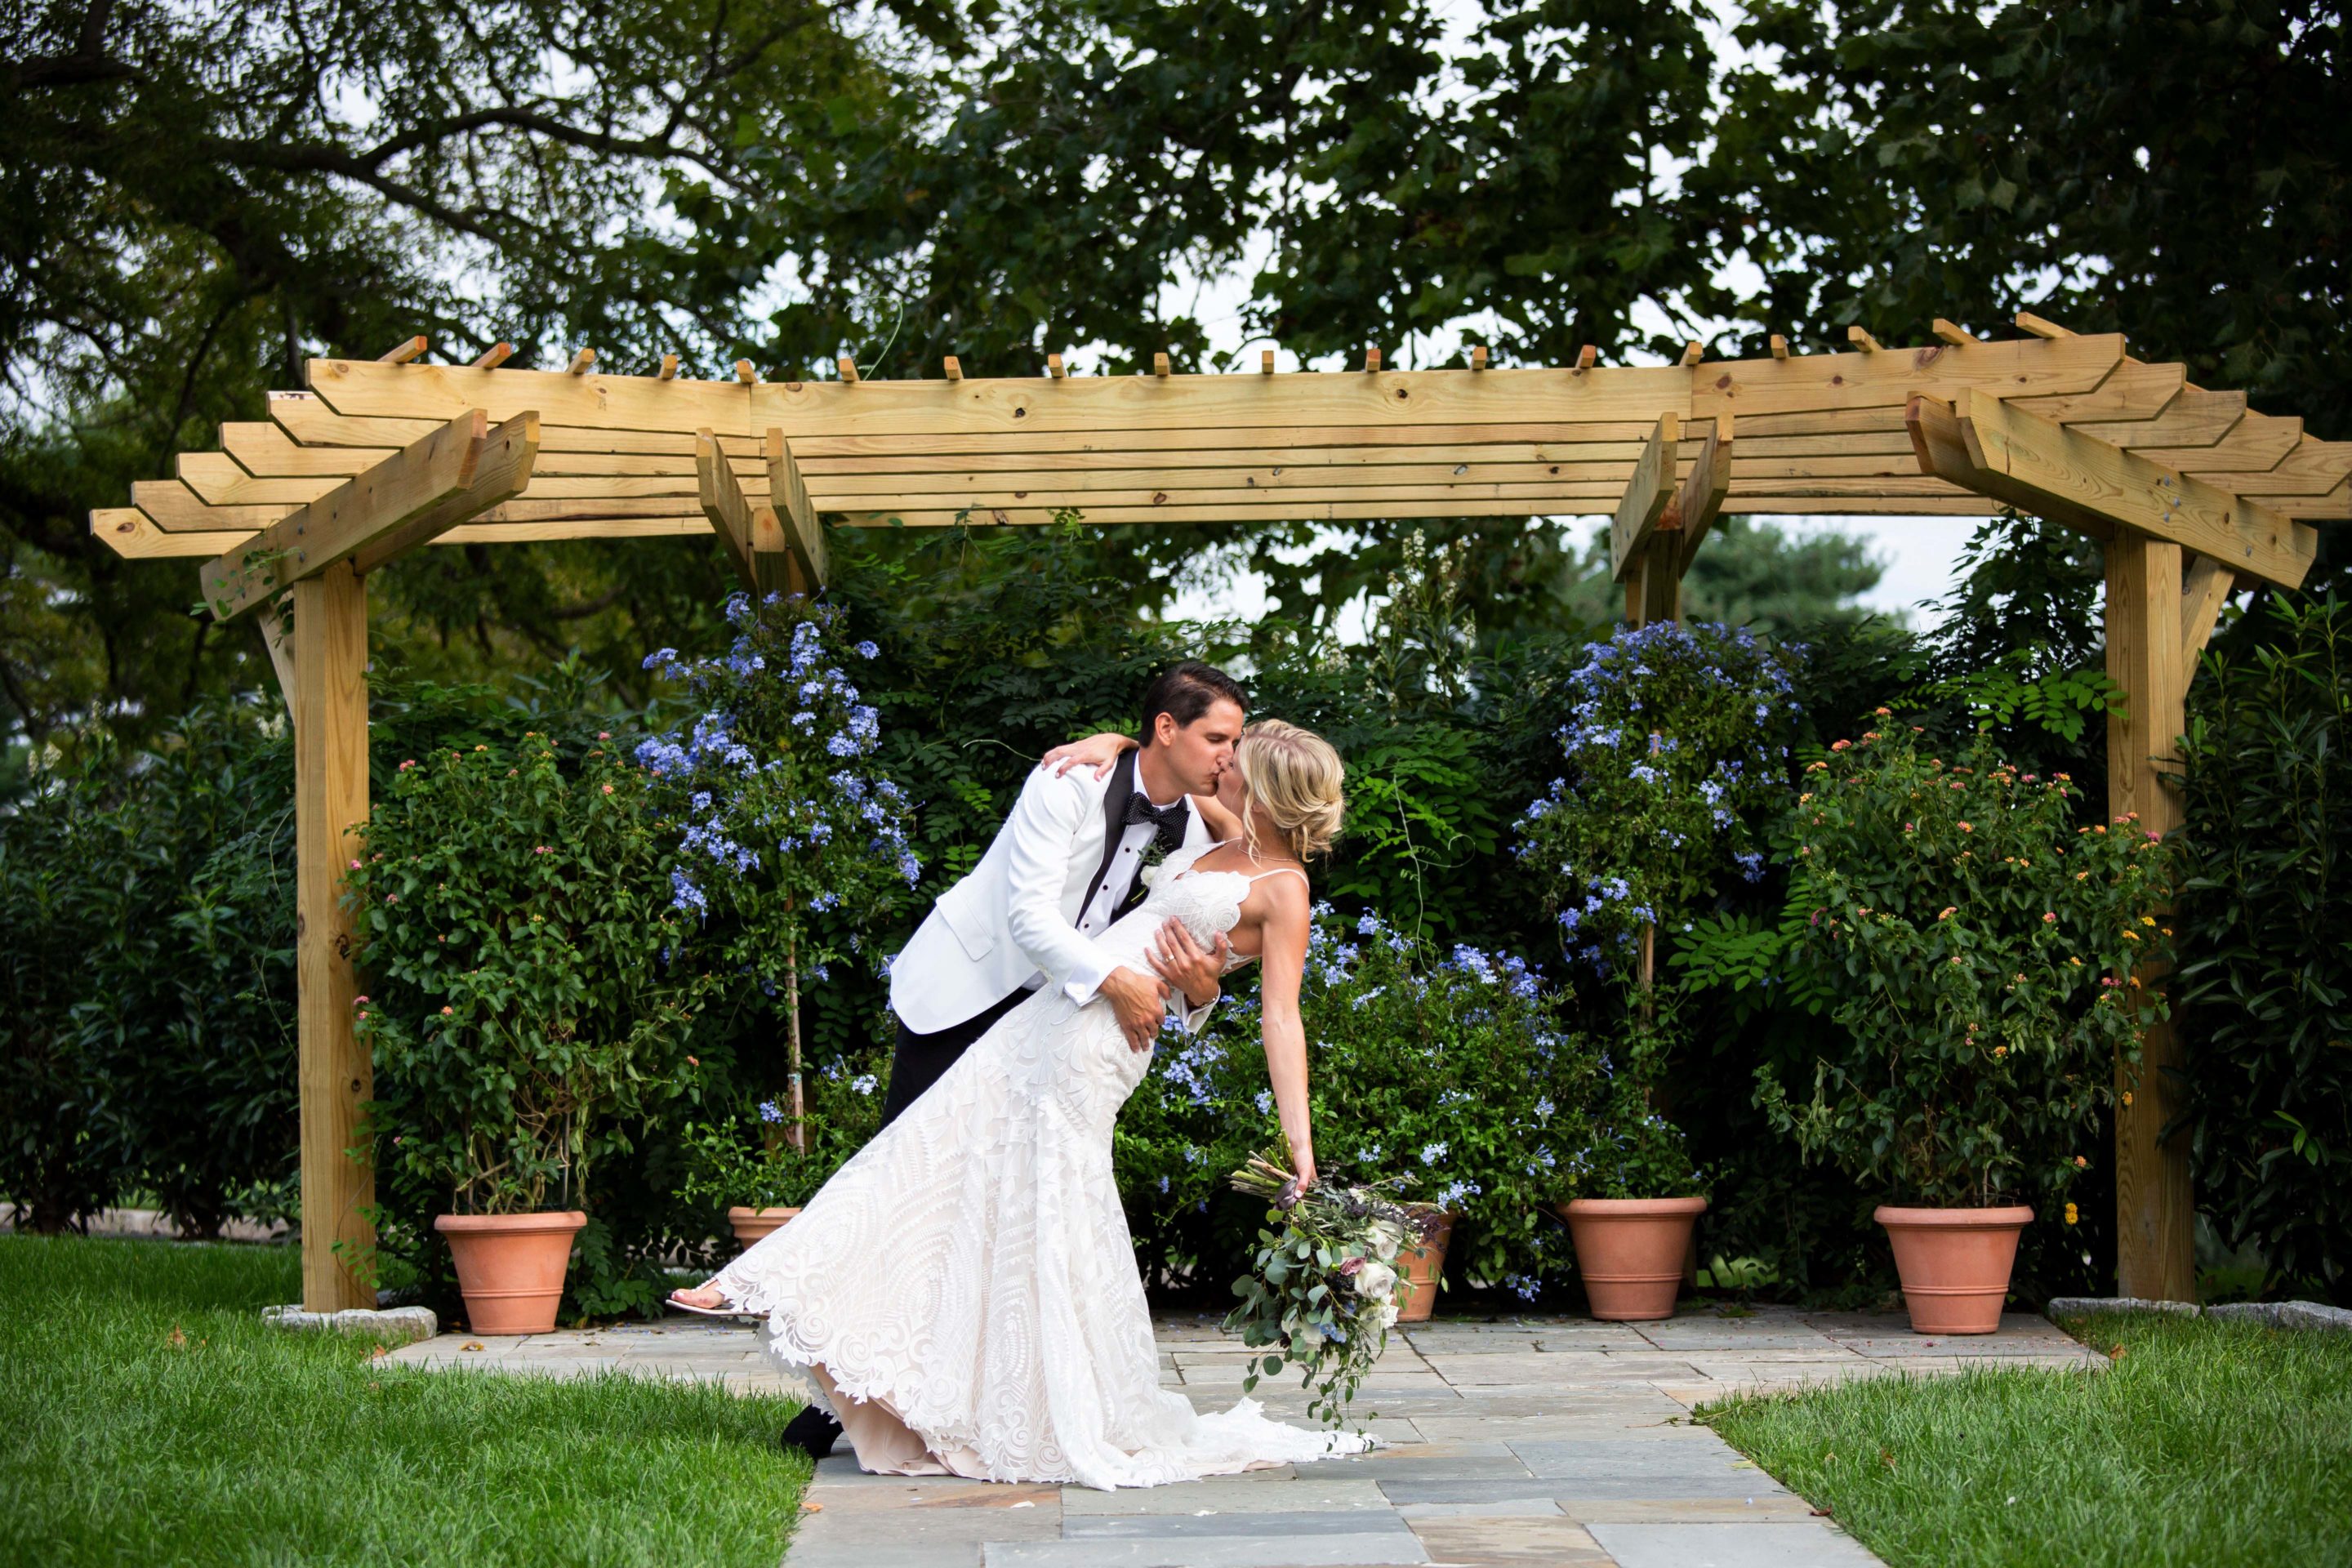 Bride and Groom Kissing at Outdoor Ceremony Surrounded by Folliage